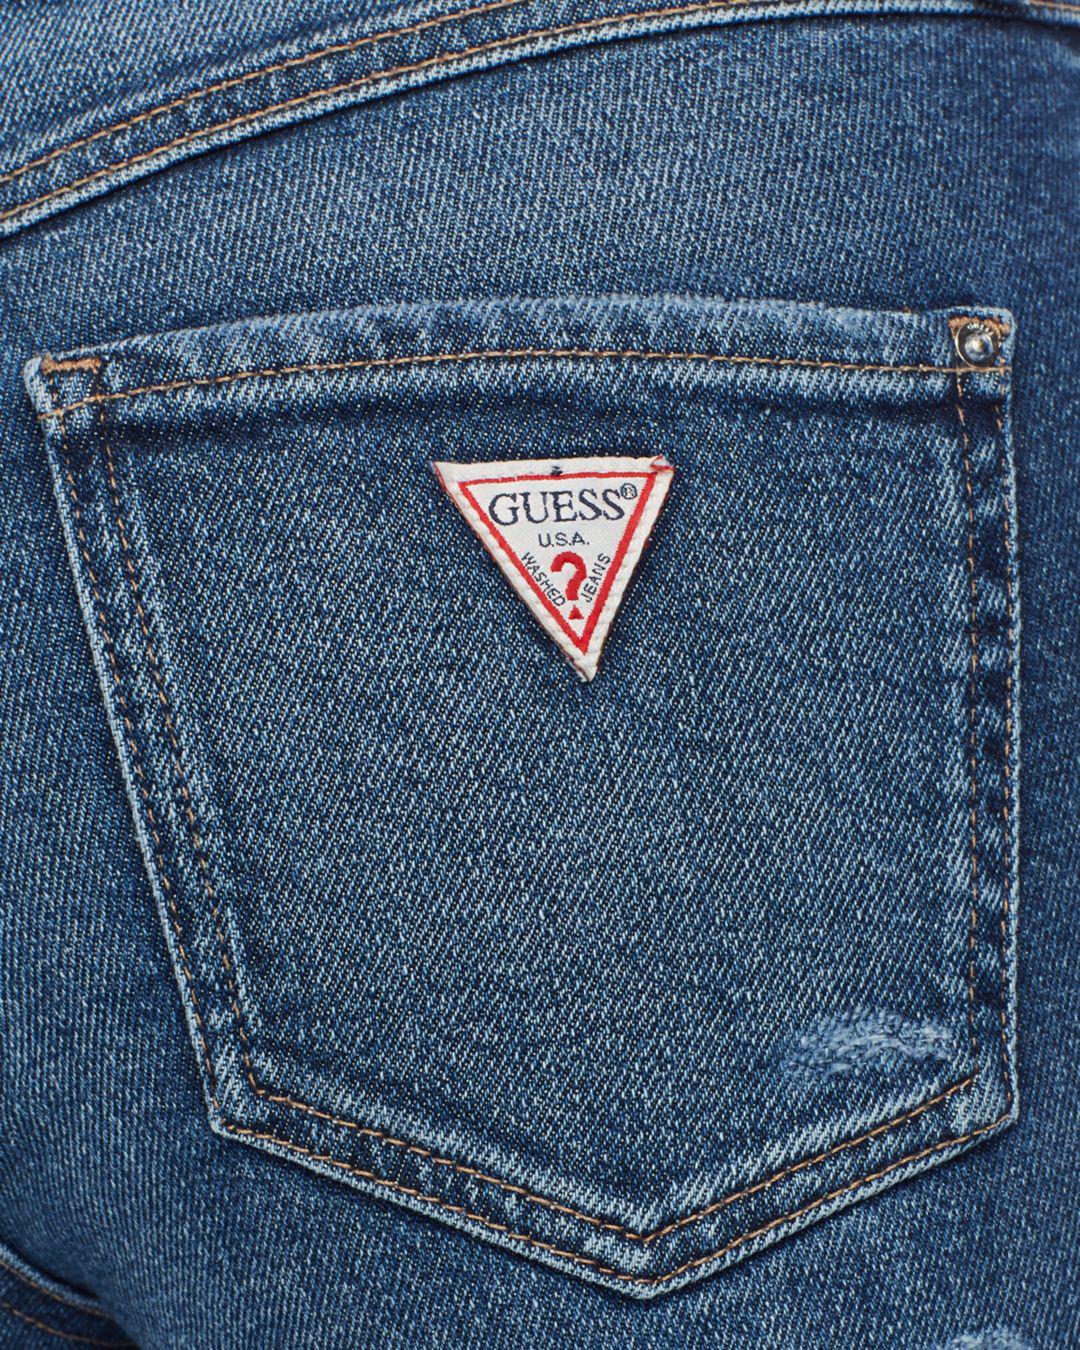 Guess Denim 1981 Destroyed Skinny Jeans In Bayside Light in Blue - Lyst